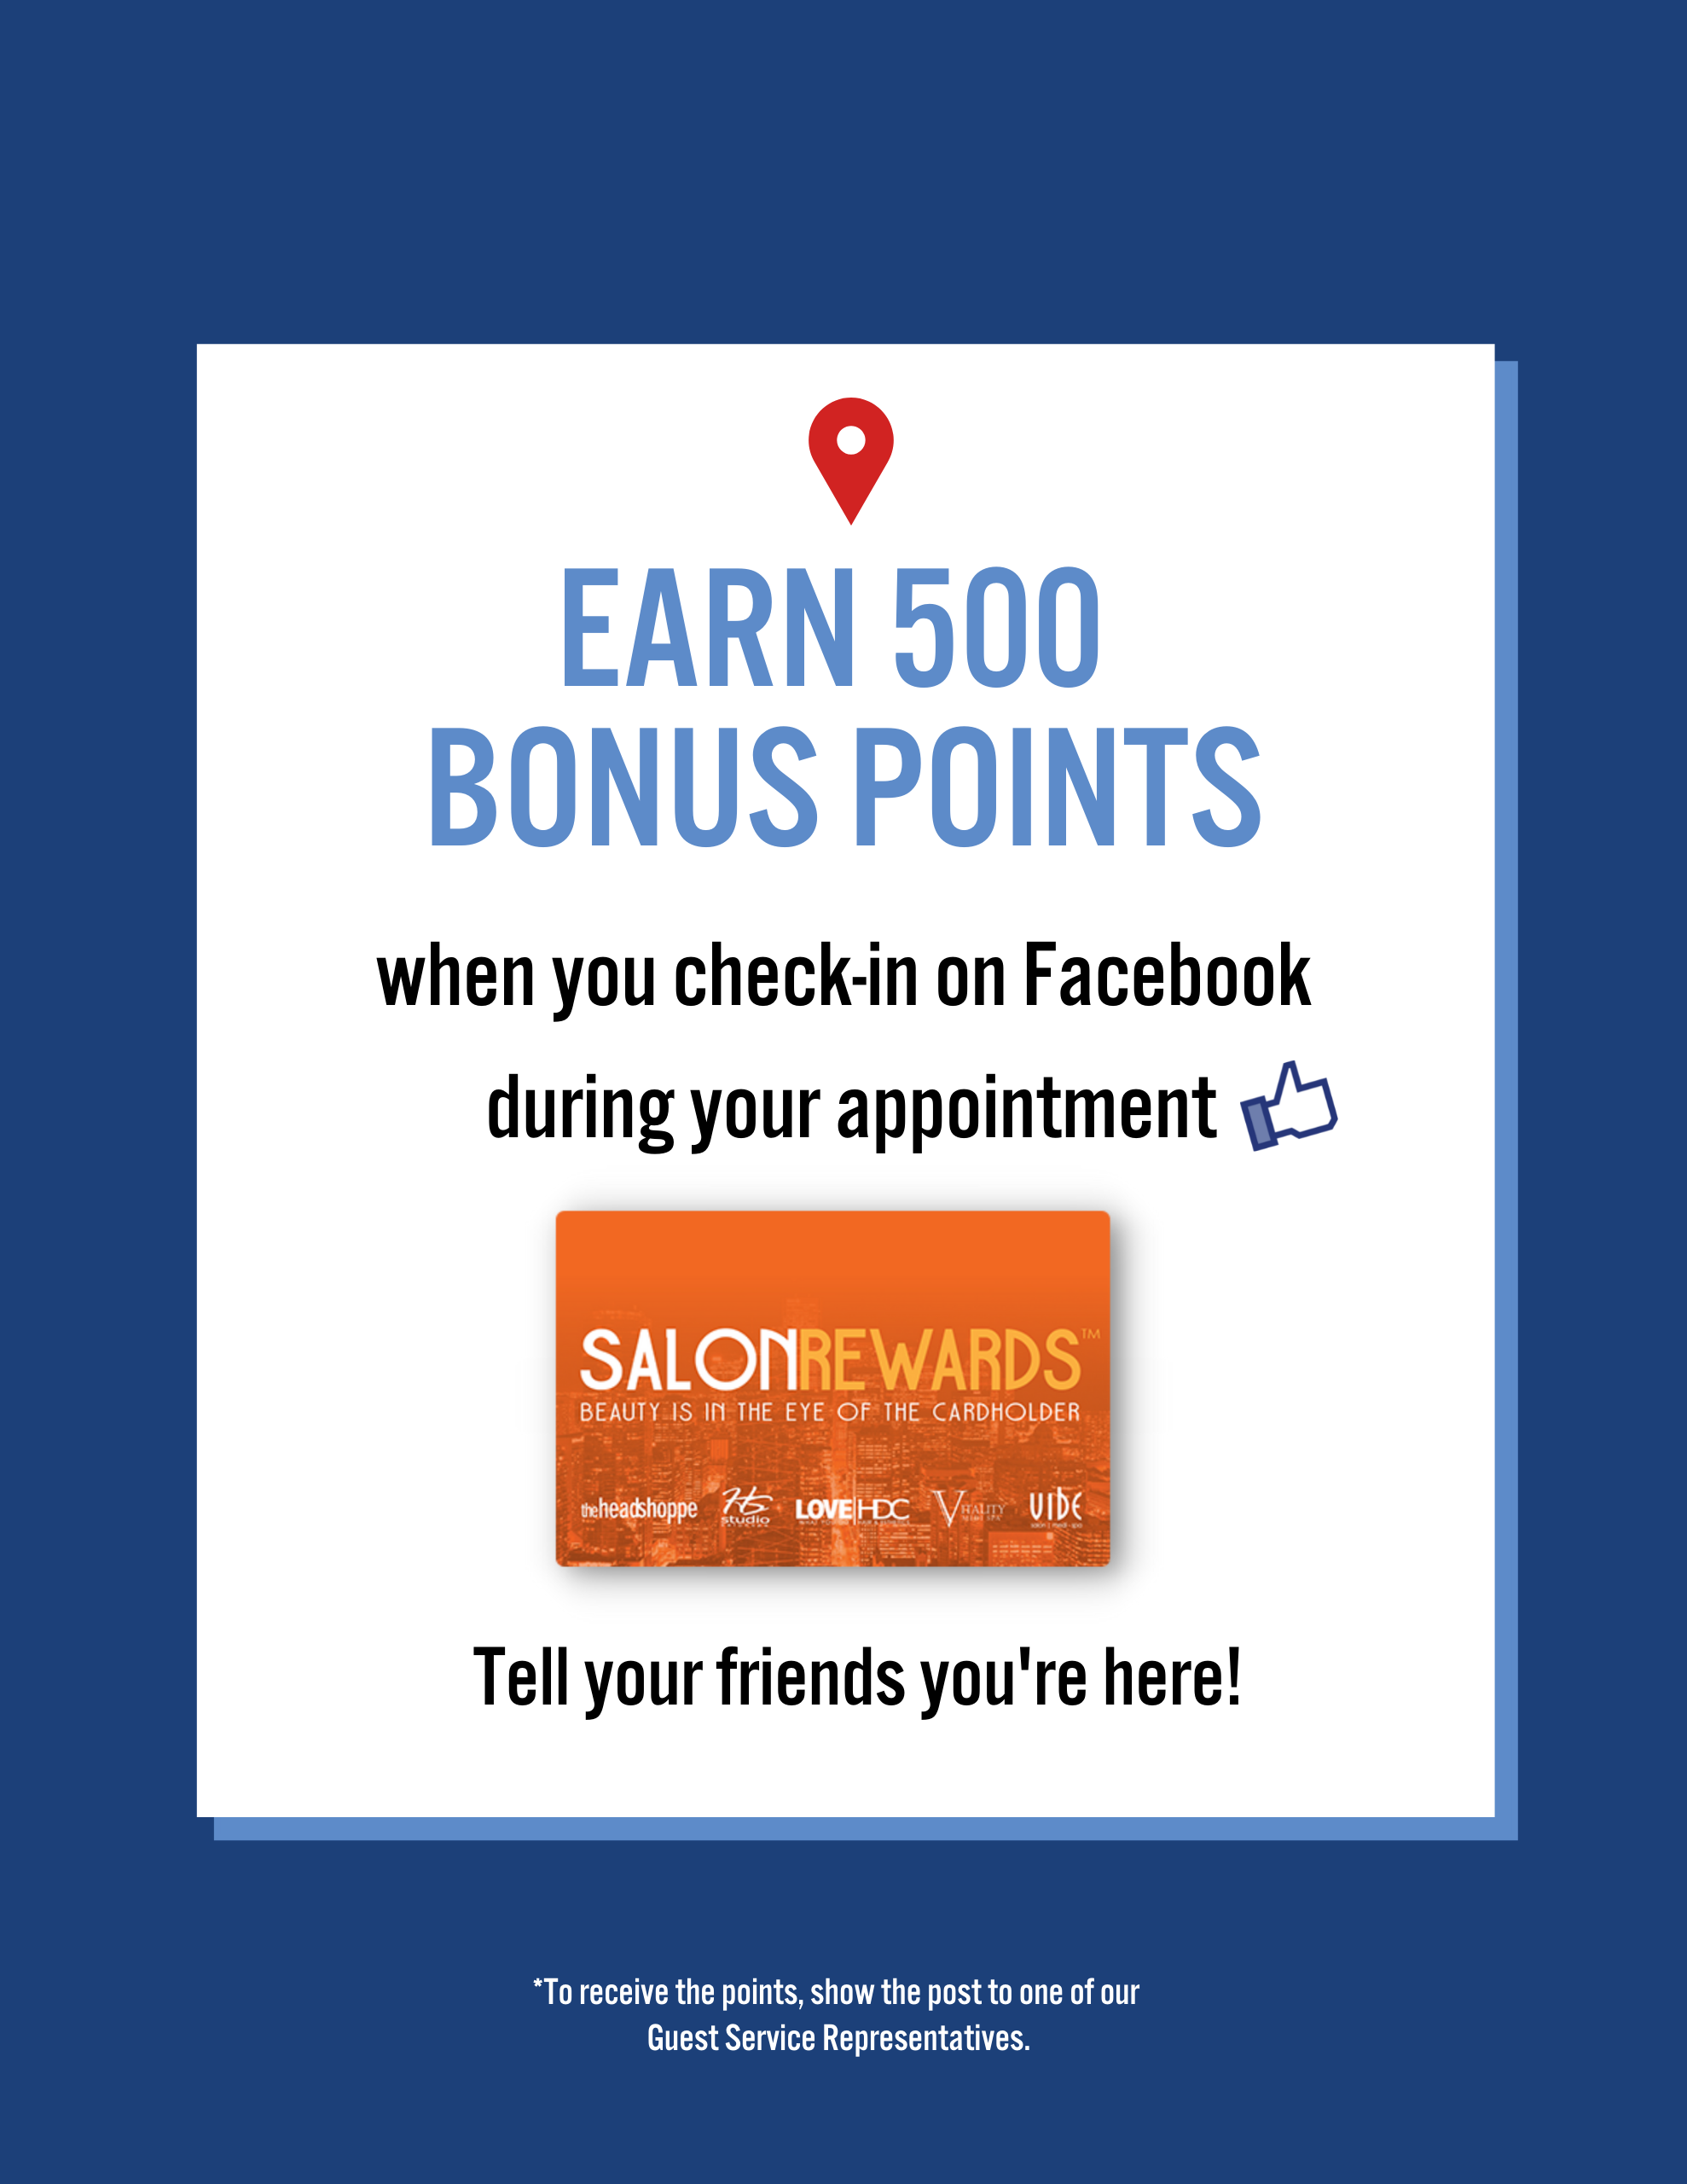 Earn 500 SRBPs when you check in on Facebook